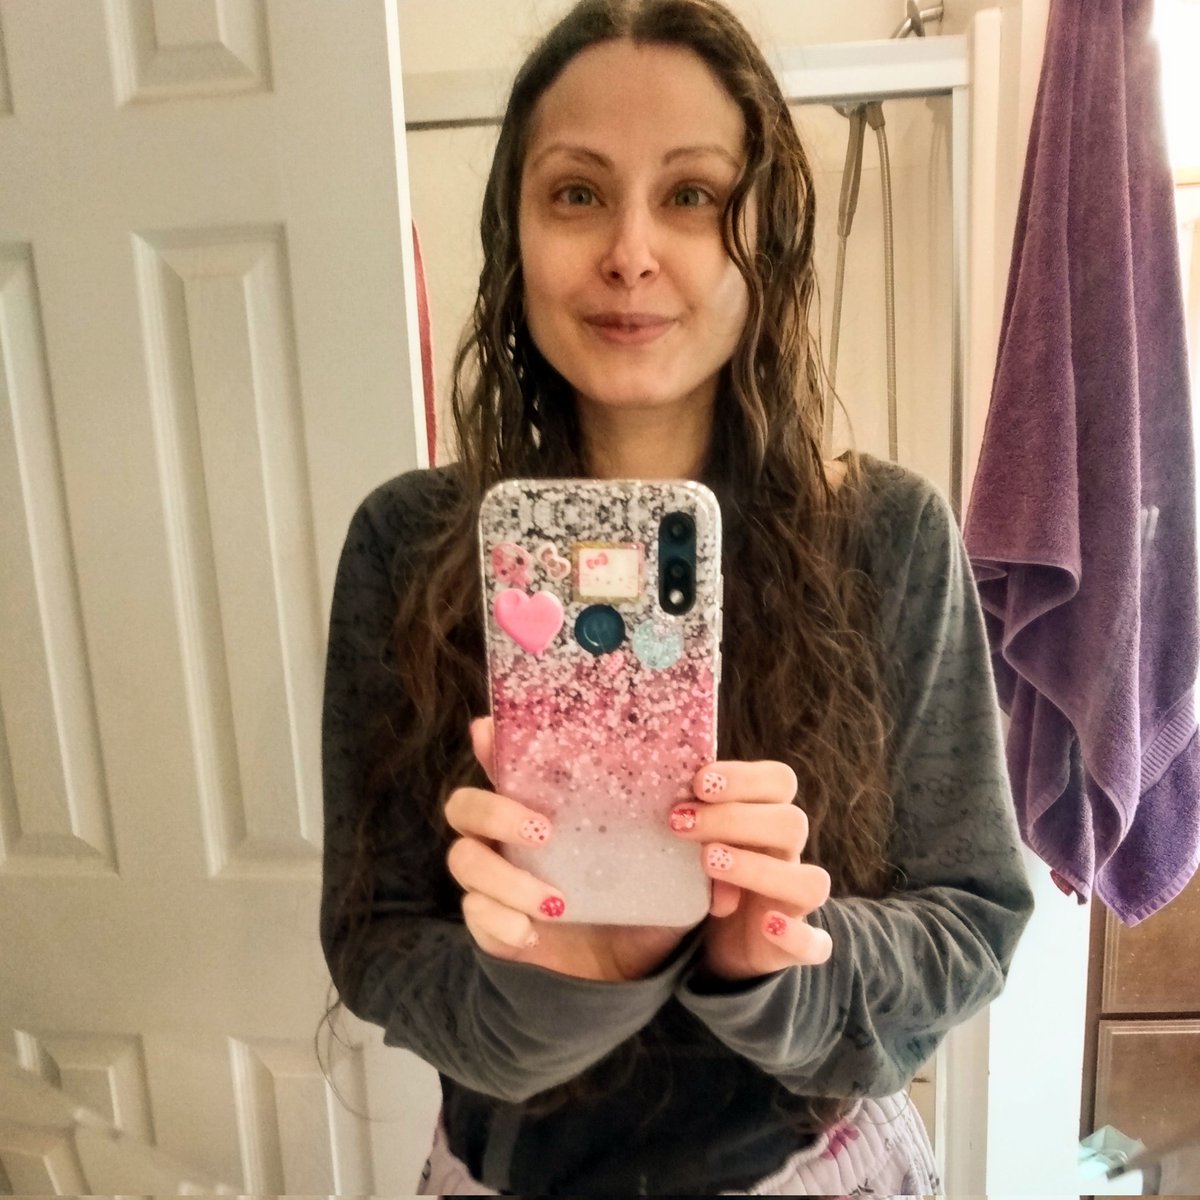 It's been a while since I took a photo of myself. Here is a curly hair mirror picture! I'm trying to make the best of a hard day. #DisabledAndCute #DisabledCutie #Disability